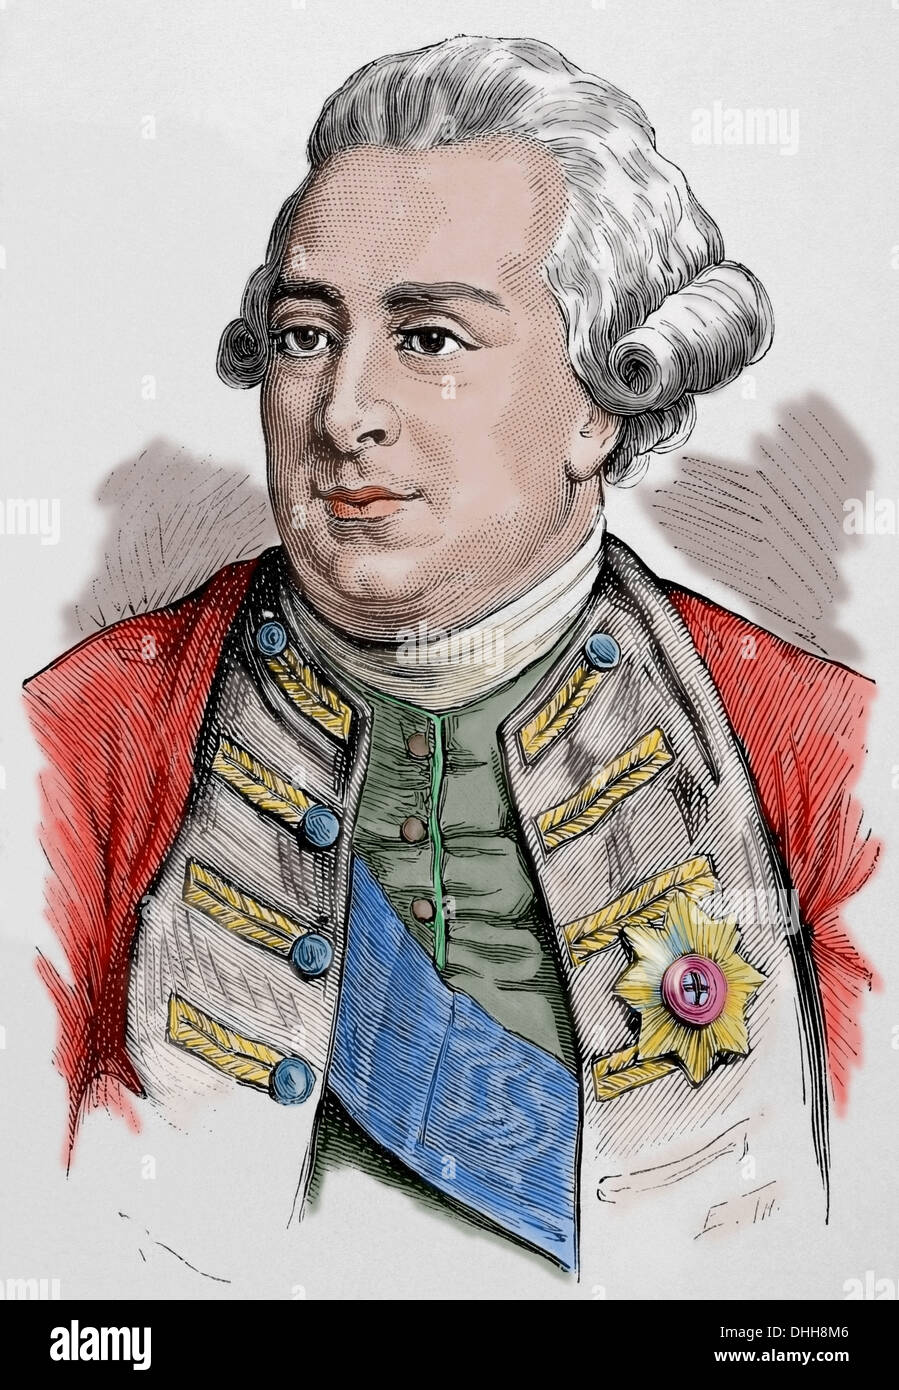 George III (1738-1820). King of Great Britain and Ireland later King of the United Kingdom and of Hanover. Colored engraving. Stock Photo